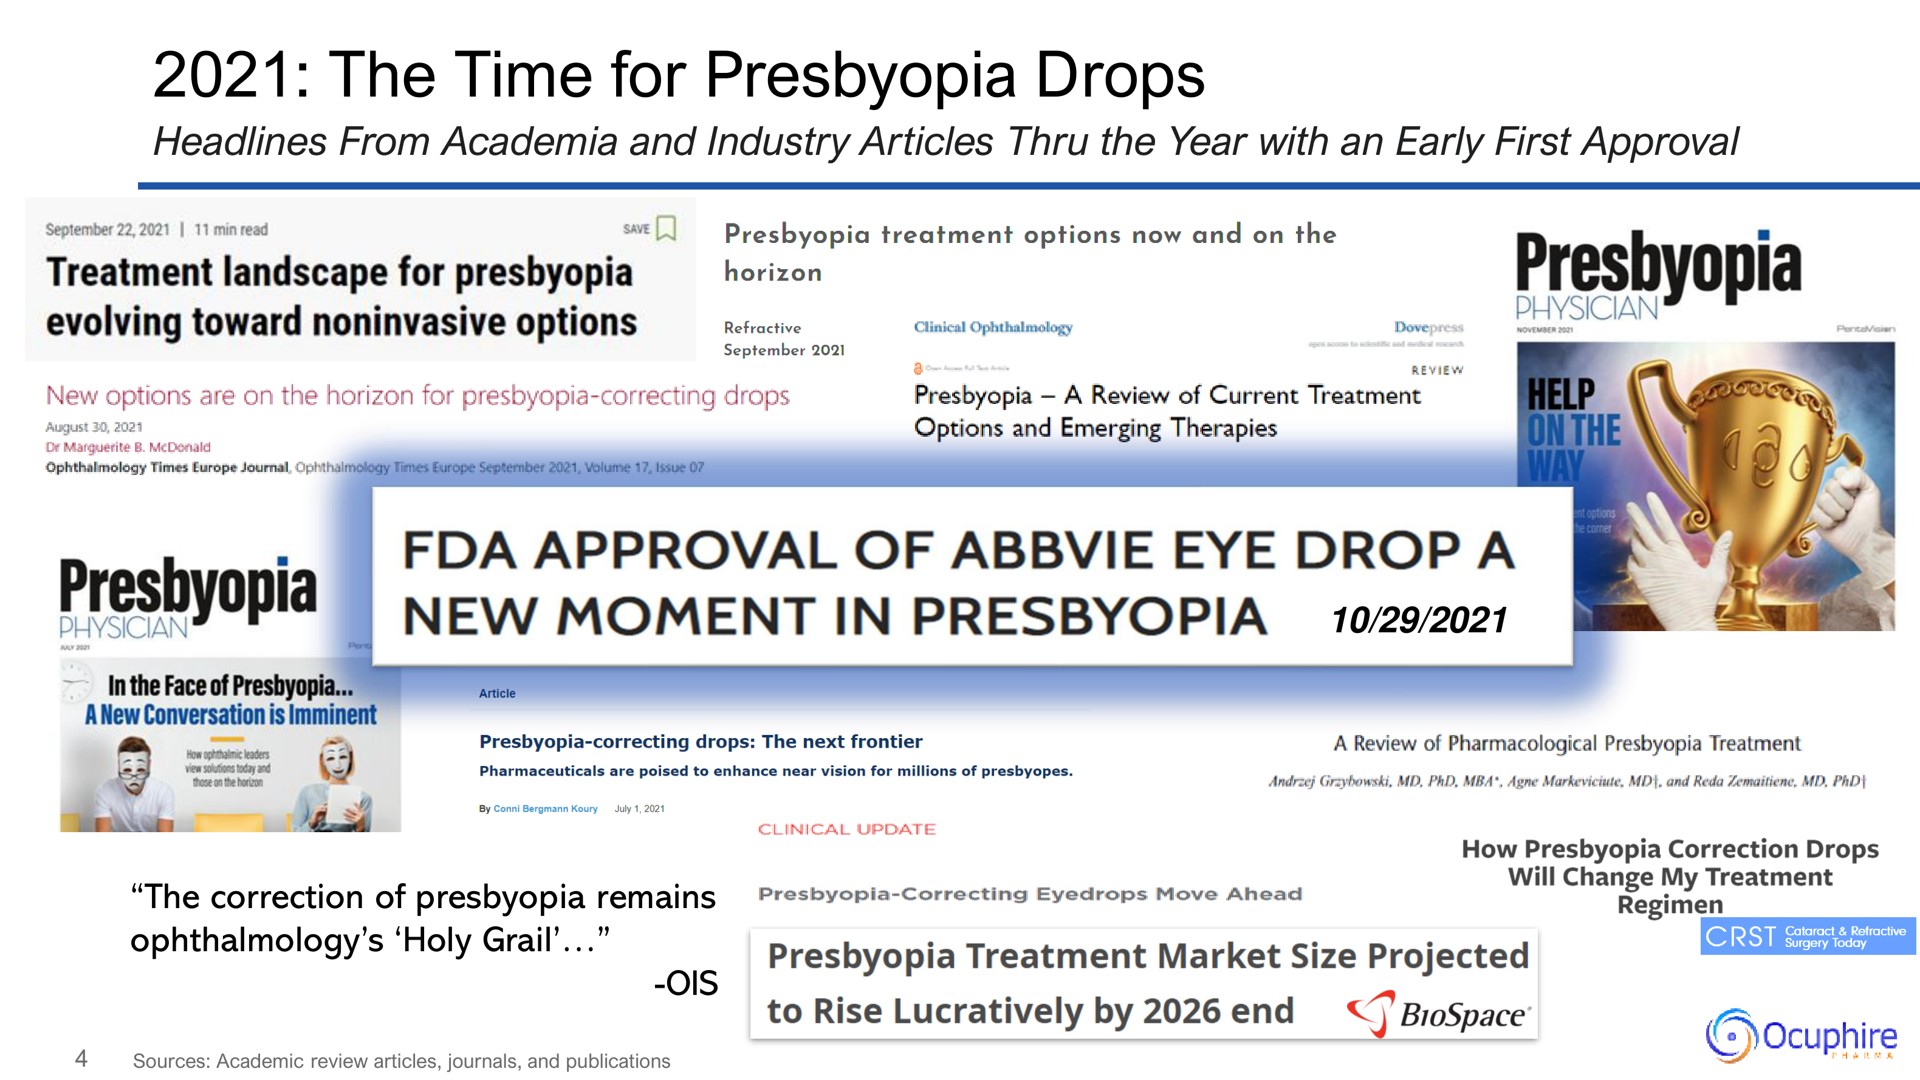 the time for presbyopia drops moment in physician approval of eye drop a | Ocuphire Pharma